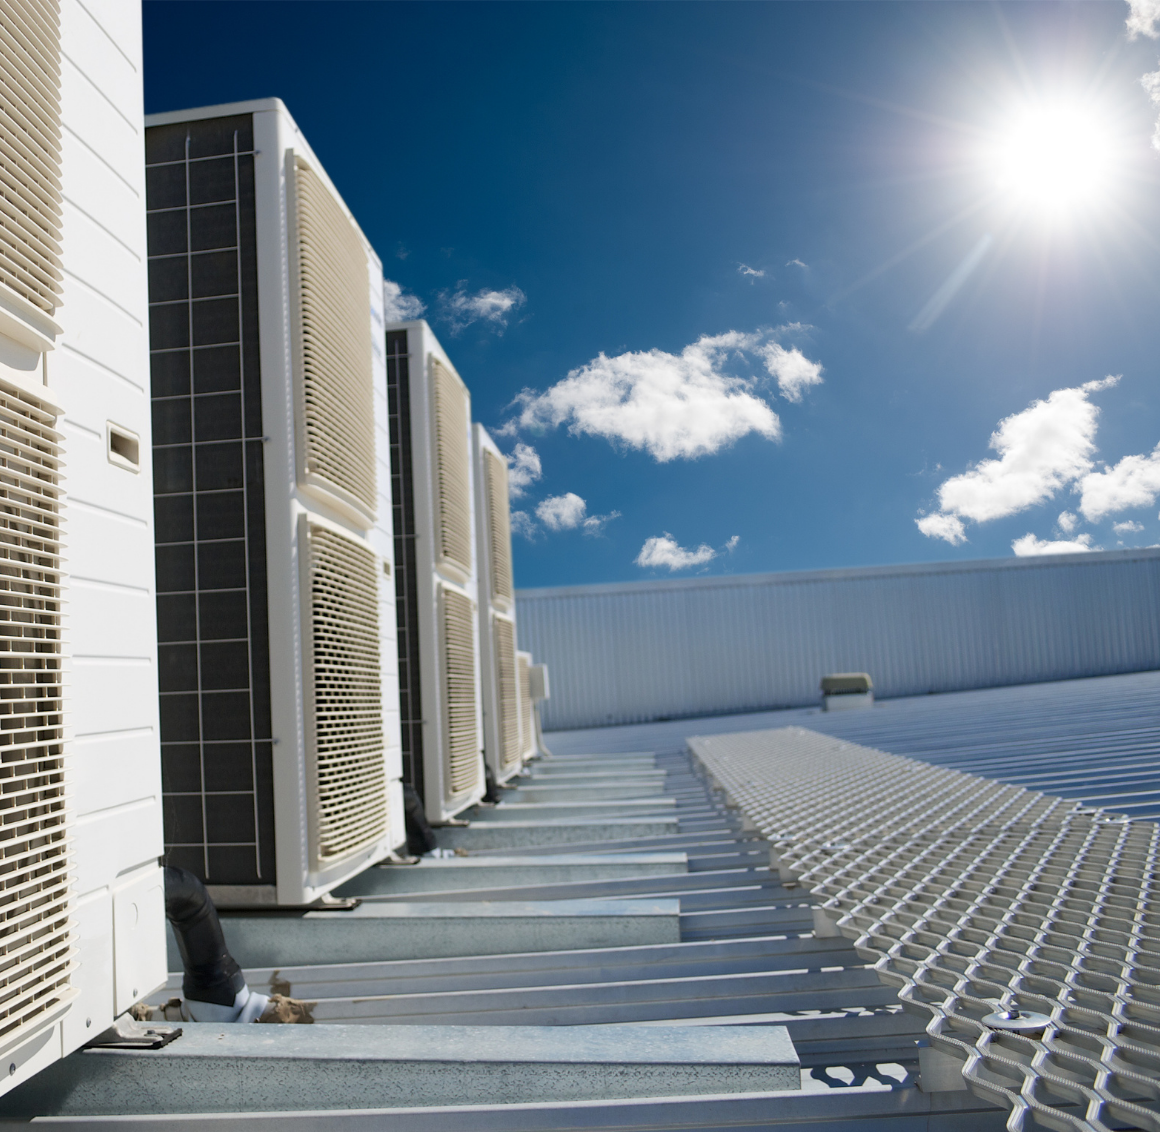 Commercial HVAC System on a Rooftoop